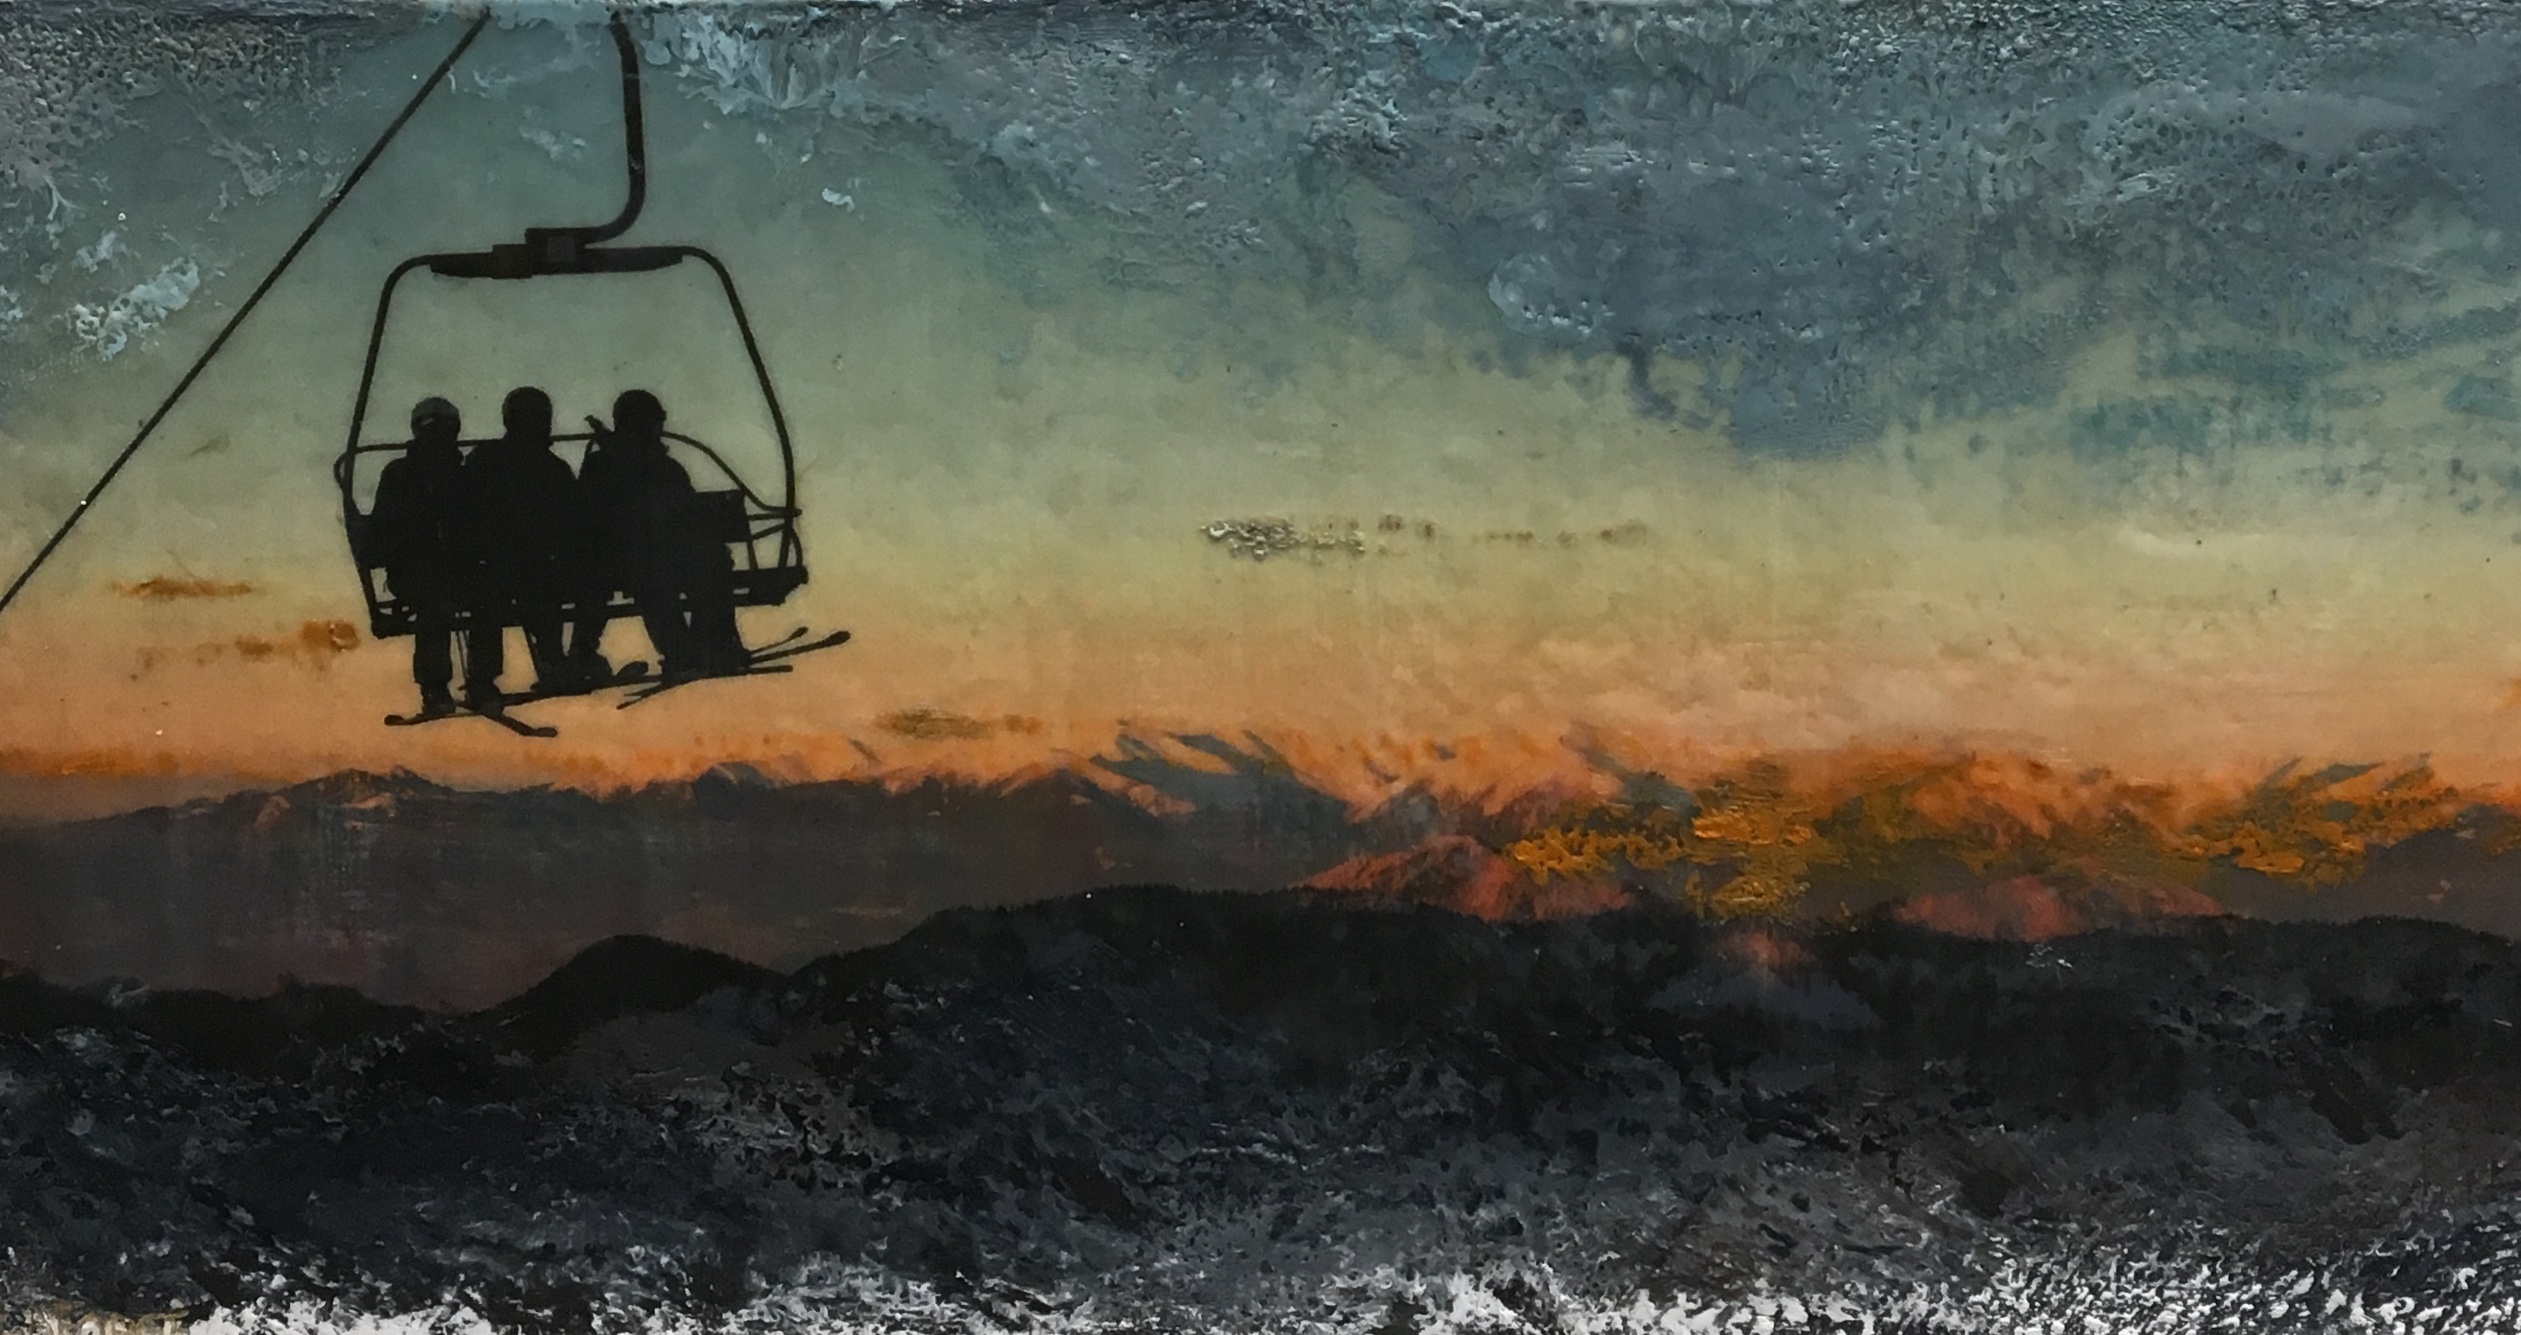 Hitting the Slopes 2 by Lee Anne LaForge, encaustic | Effusion Art Gallery + Cast Glass Studio, Invermere BC